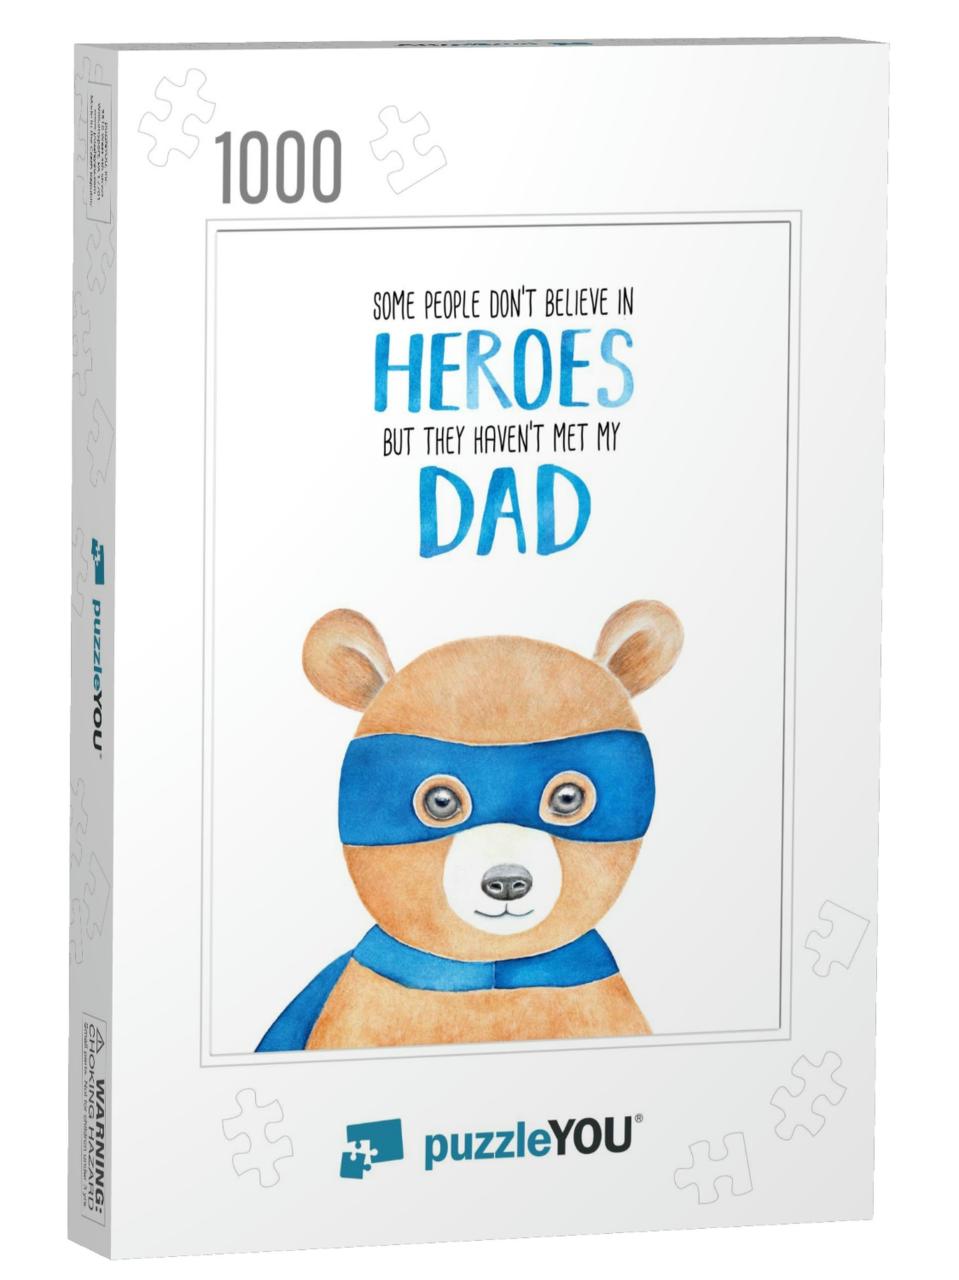 Happy Fathers Day Card Design with Little Teddy B... Jigsaw Puzzle with 1000 pieces